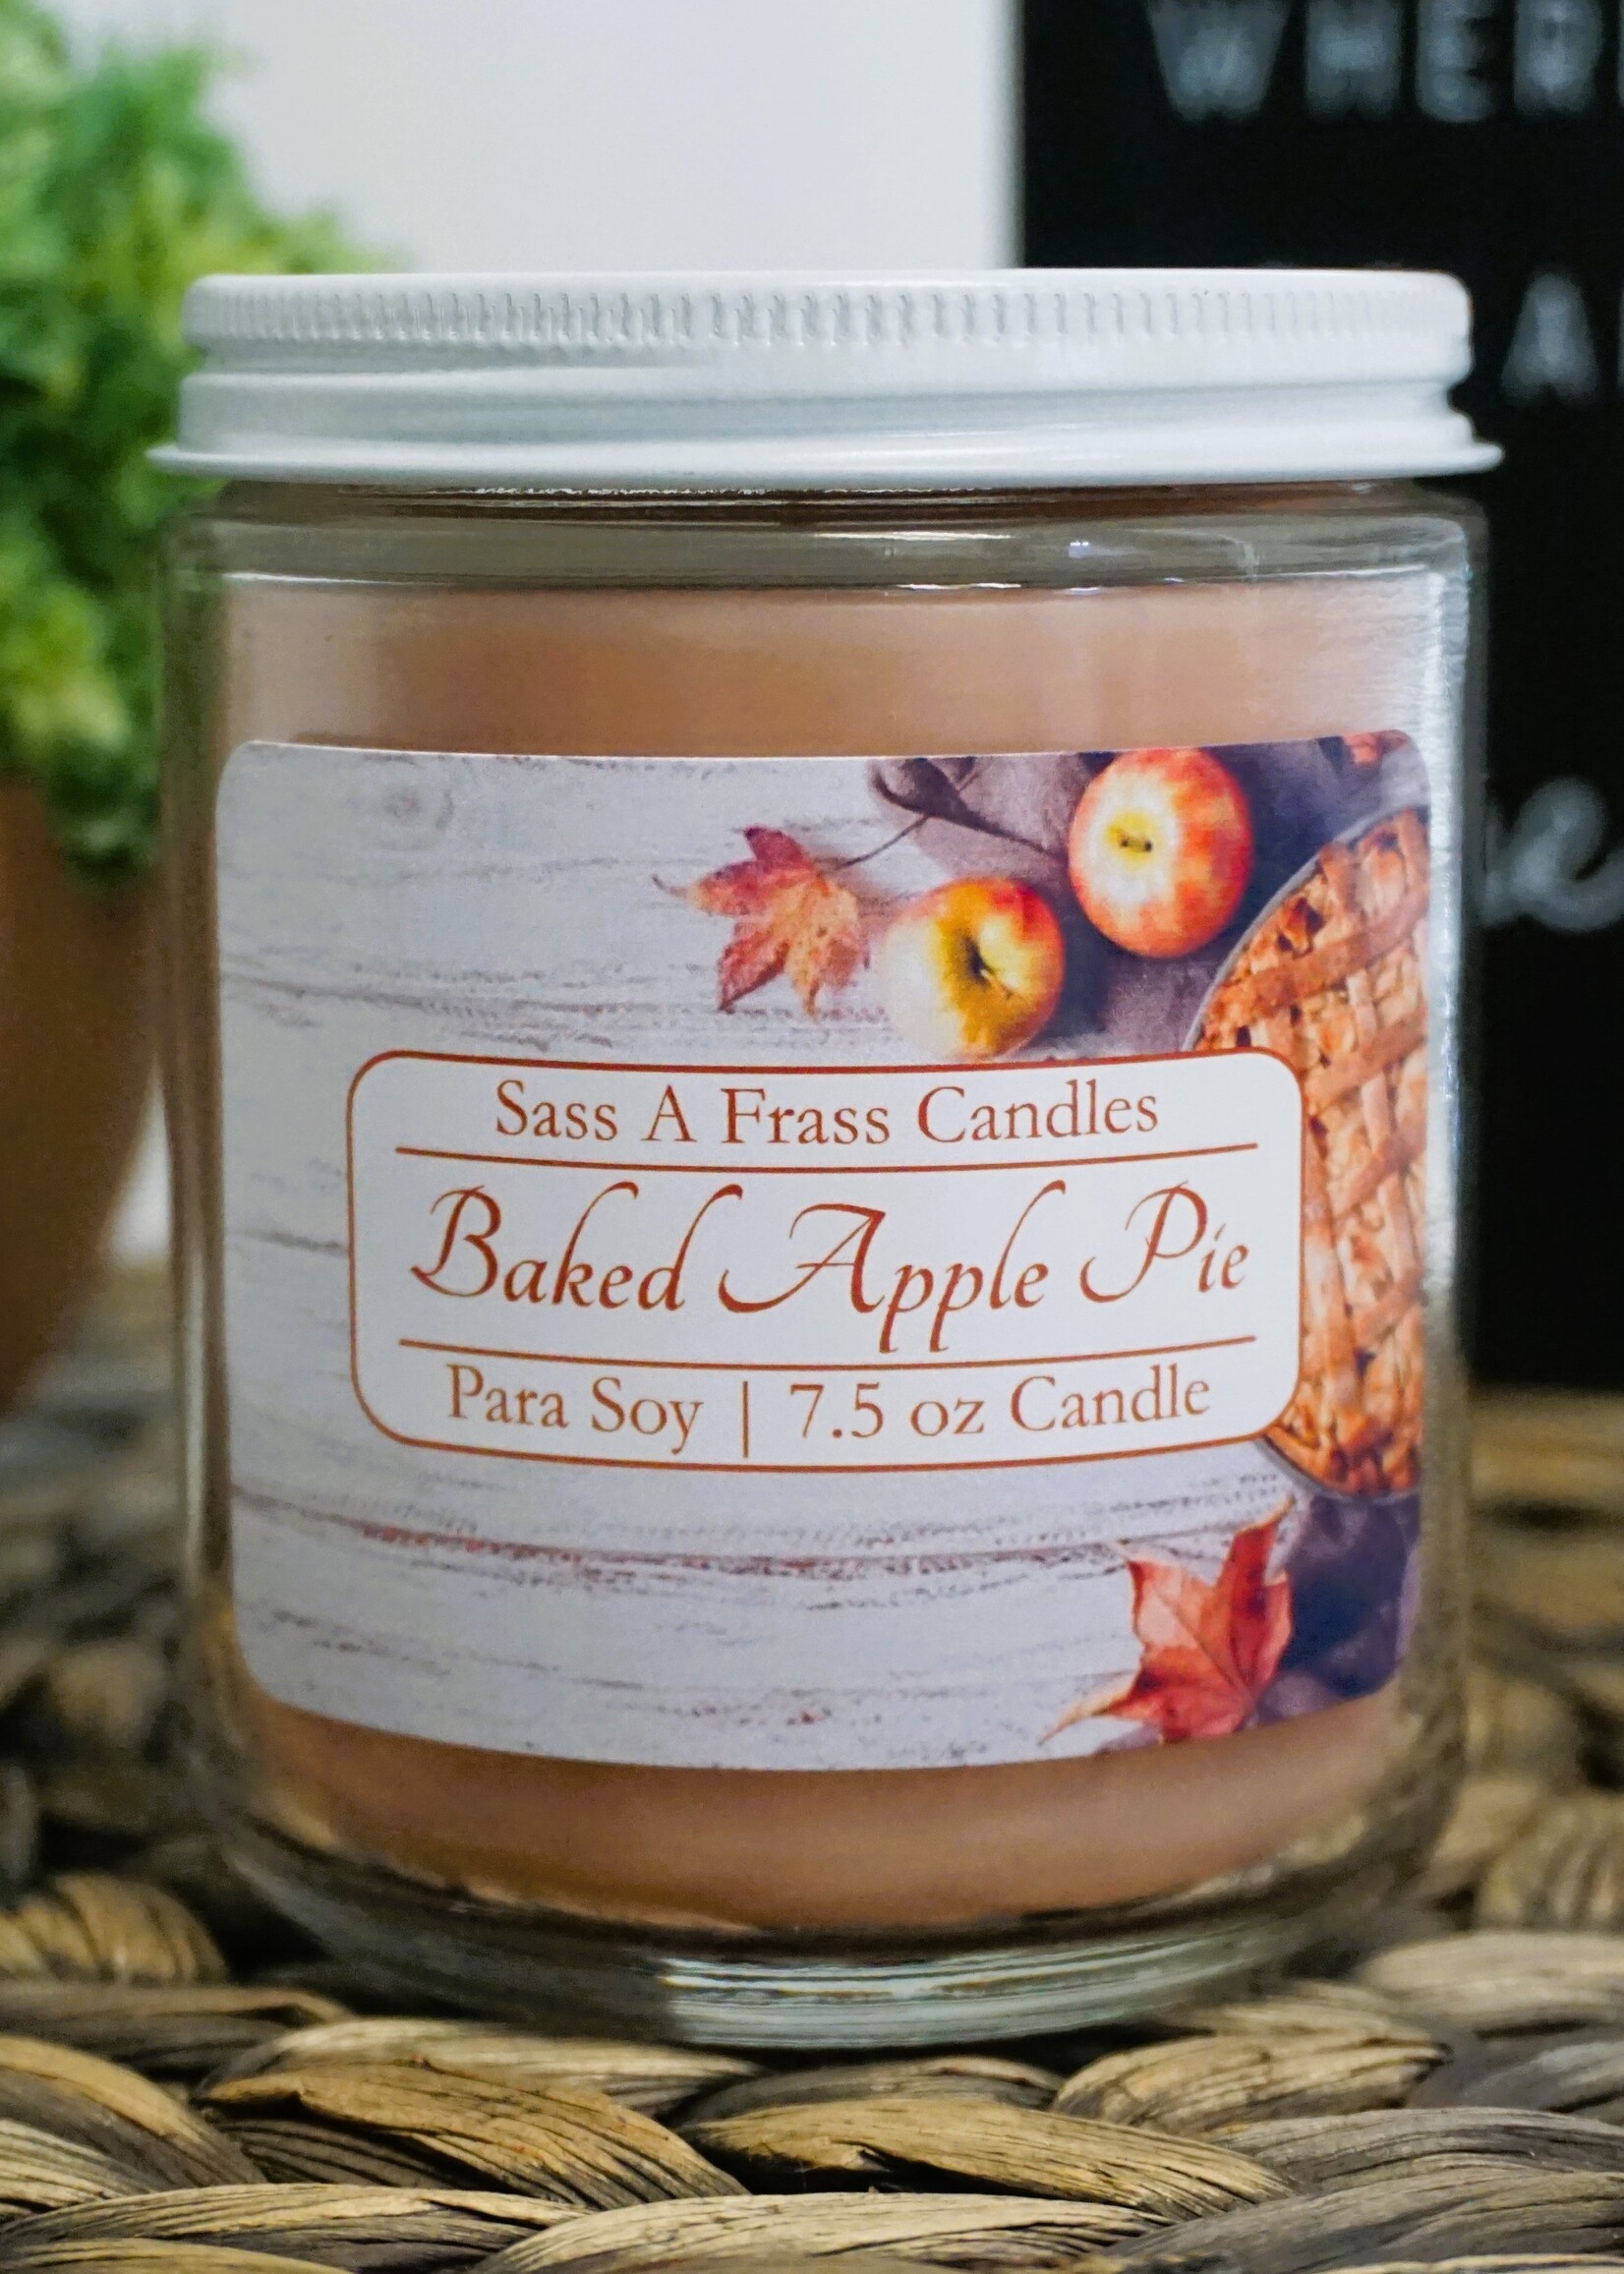 Baked Apple Pie 7.5 oz Candle